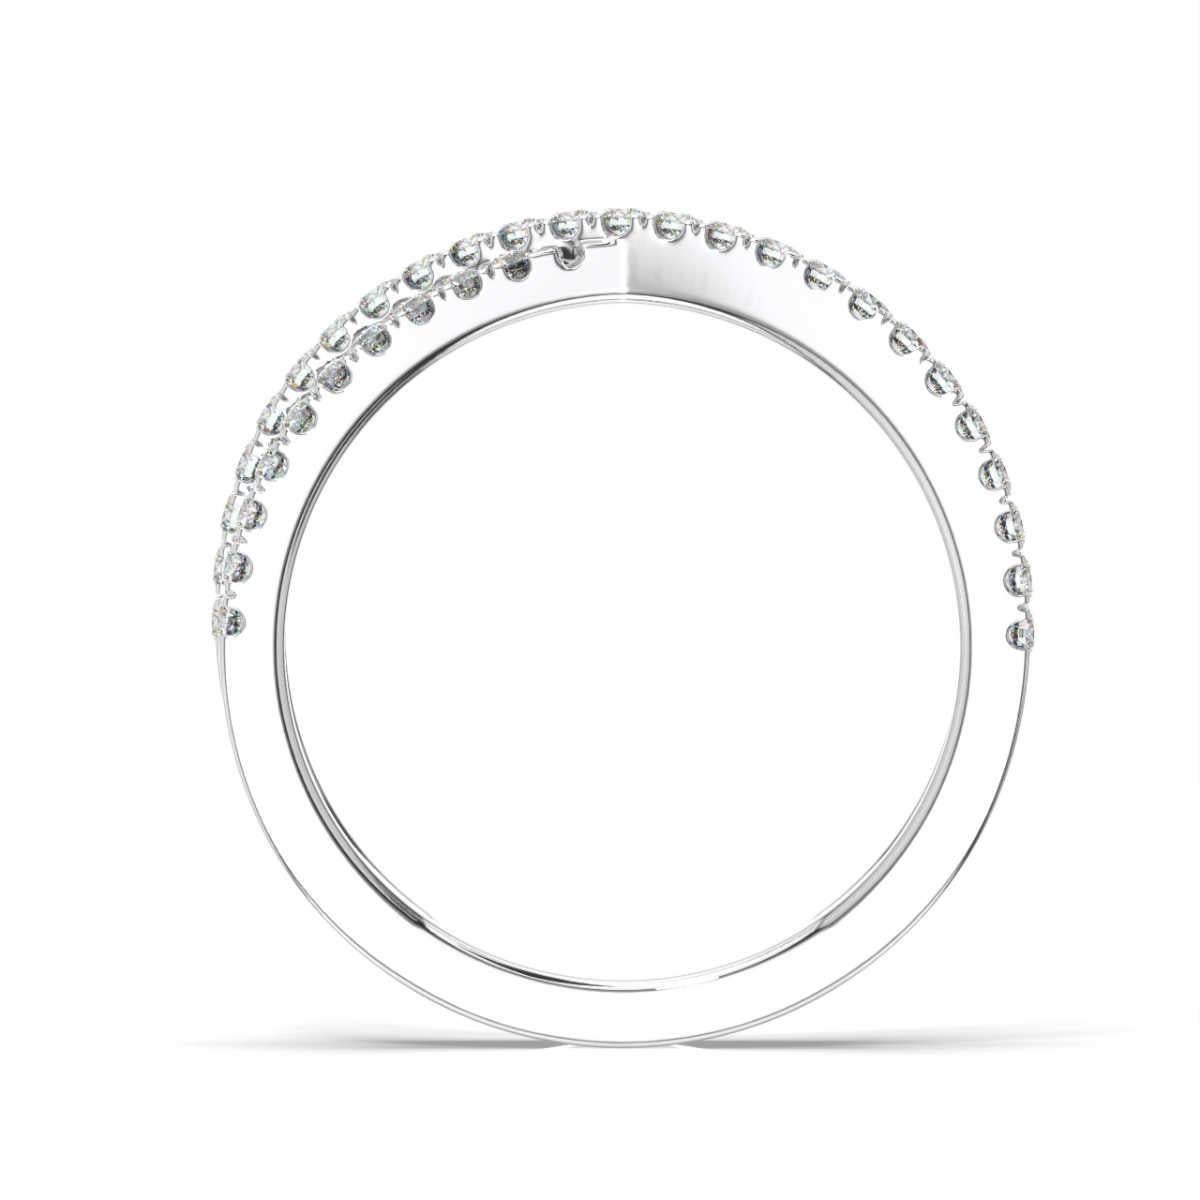 Two petite bands of micro prong set diamonds to wrap interweave each other in this contemporary ring.

Product details: 

Center Gemstone Color: WHITE
Side Gemstone Type: NATURAL DIAMOND
Side Gemstone Shape: ROUND
Metal: 14K White Gold
Metal Weight: